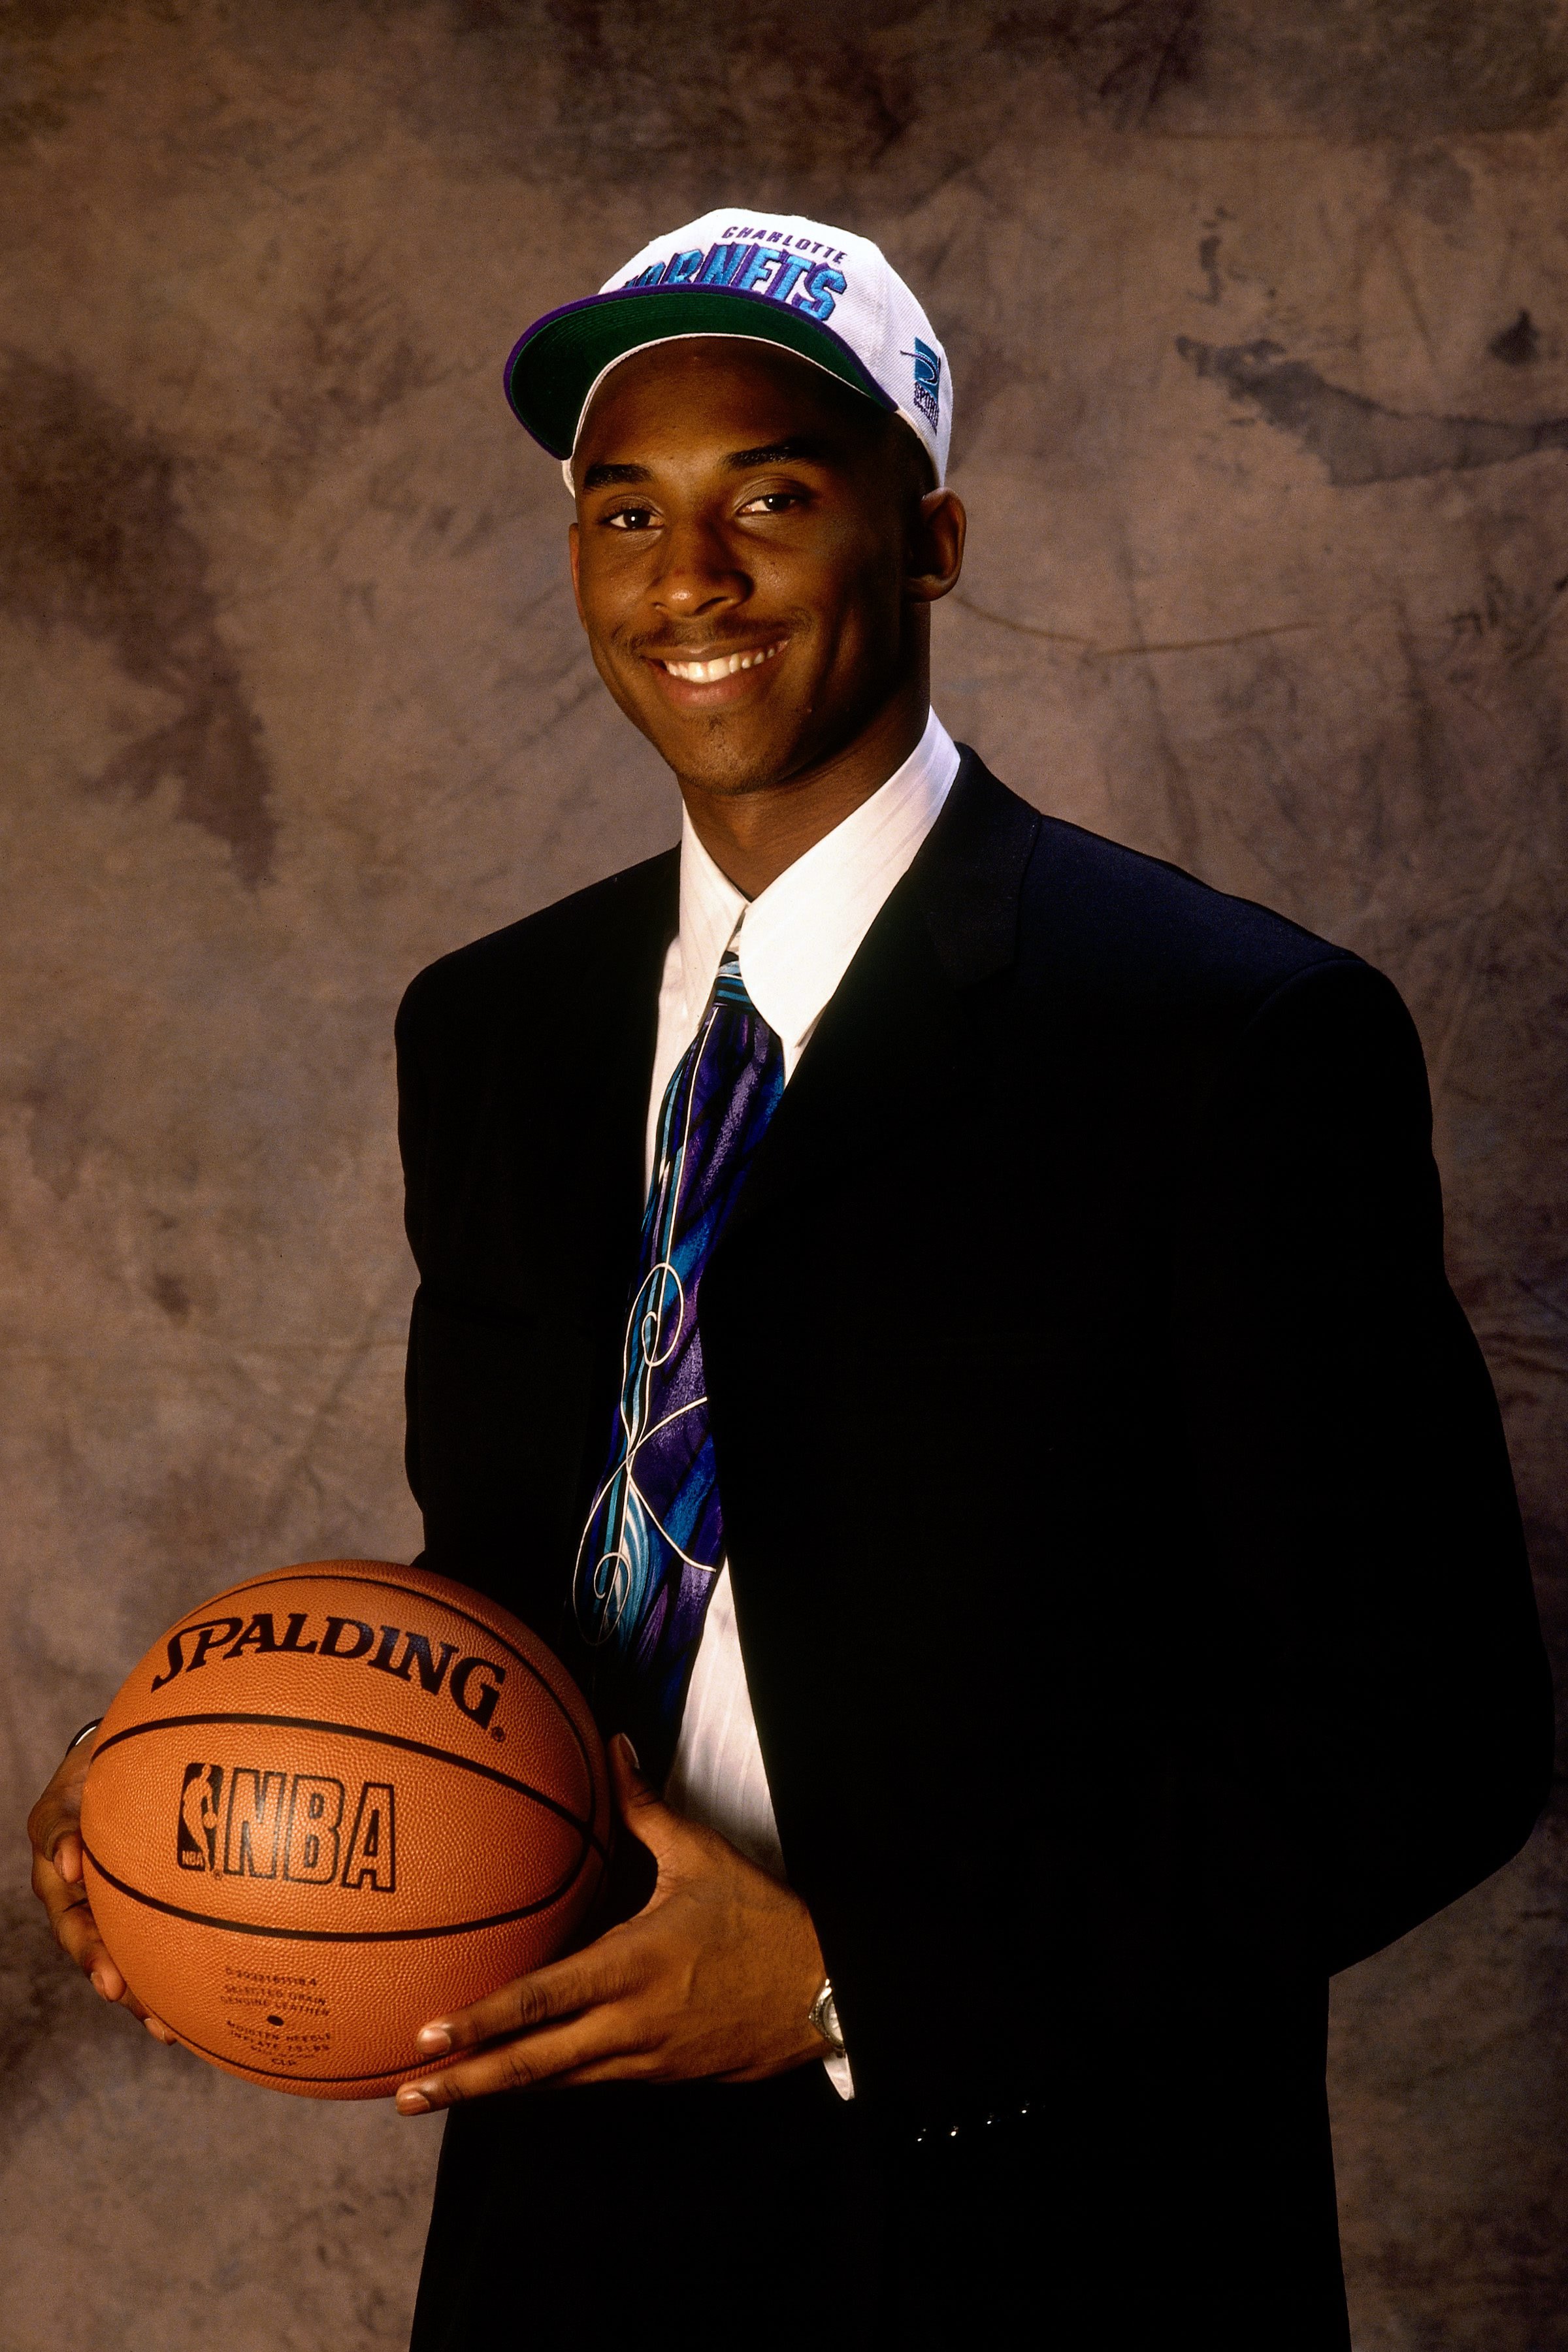 Kobe Bryant poses for a portrait after being selected by the Charlotte Hornets in the first round of the 1996 NBA Draft at Madison Square Garden in New York on June 26, 1996. He joined the NBA straight out of high school, and was immediately traded to the Lakers in a previously-agreed deal between the two teams.